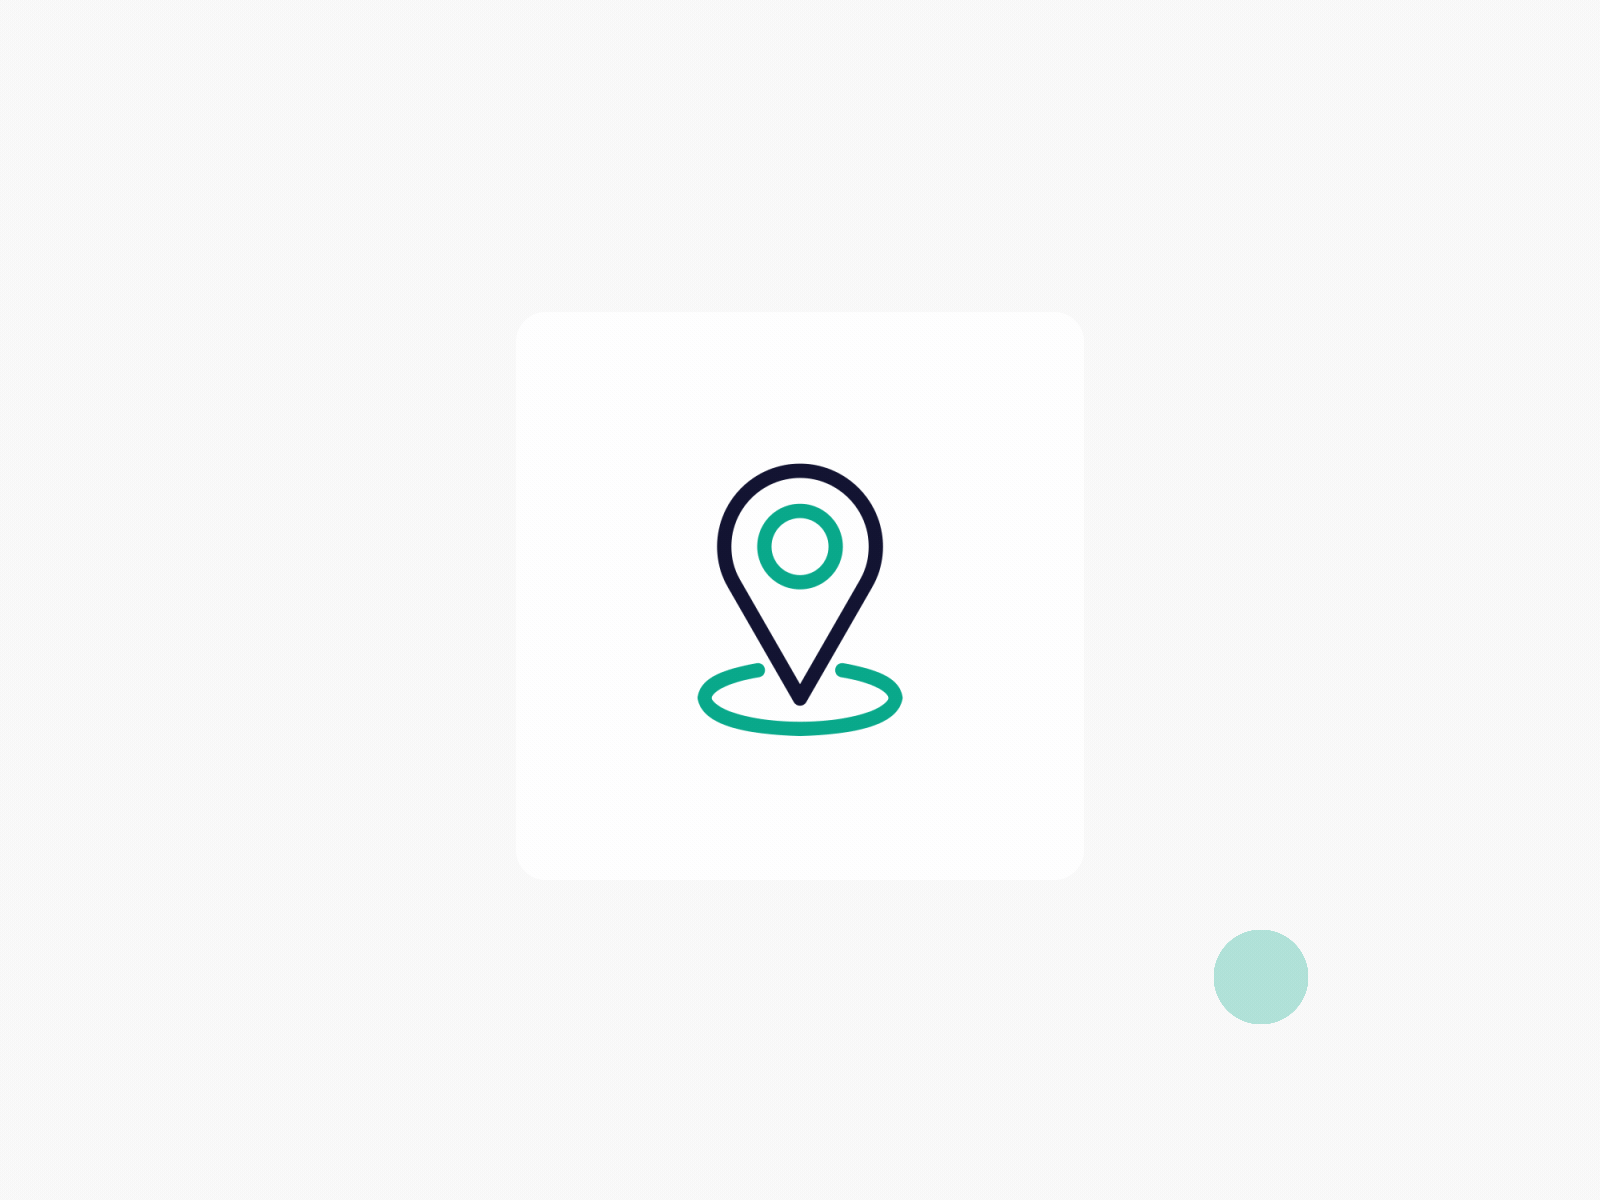 Location Pin Animated Icon by Tom Wilusz on Dribbble